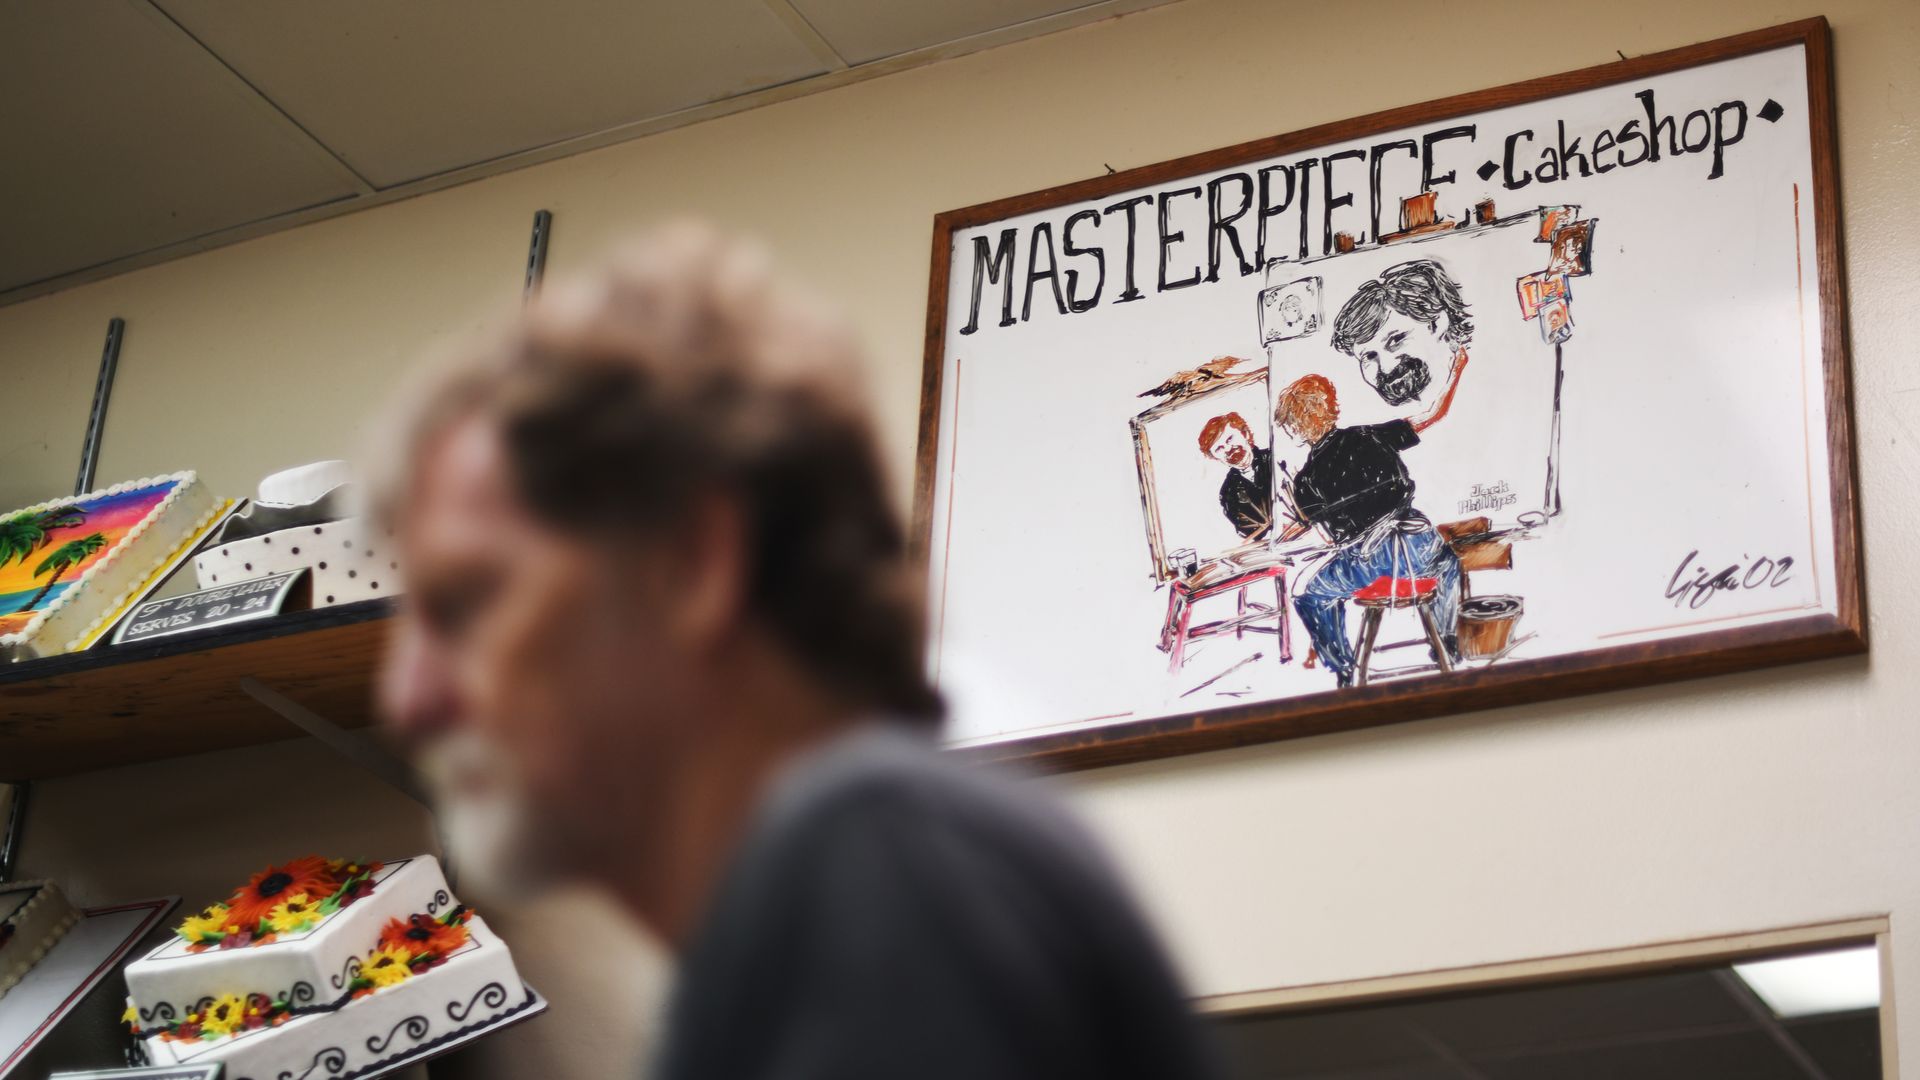 Photo of a cake shop with an art piece that says "Masterpiece Cakeshop" and an illustration of owner Jack Phillips